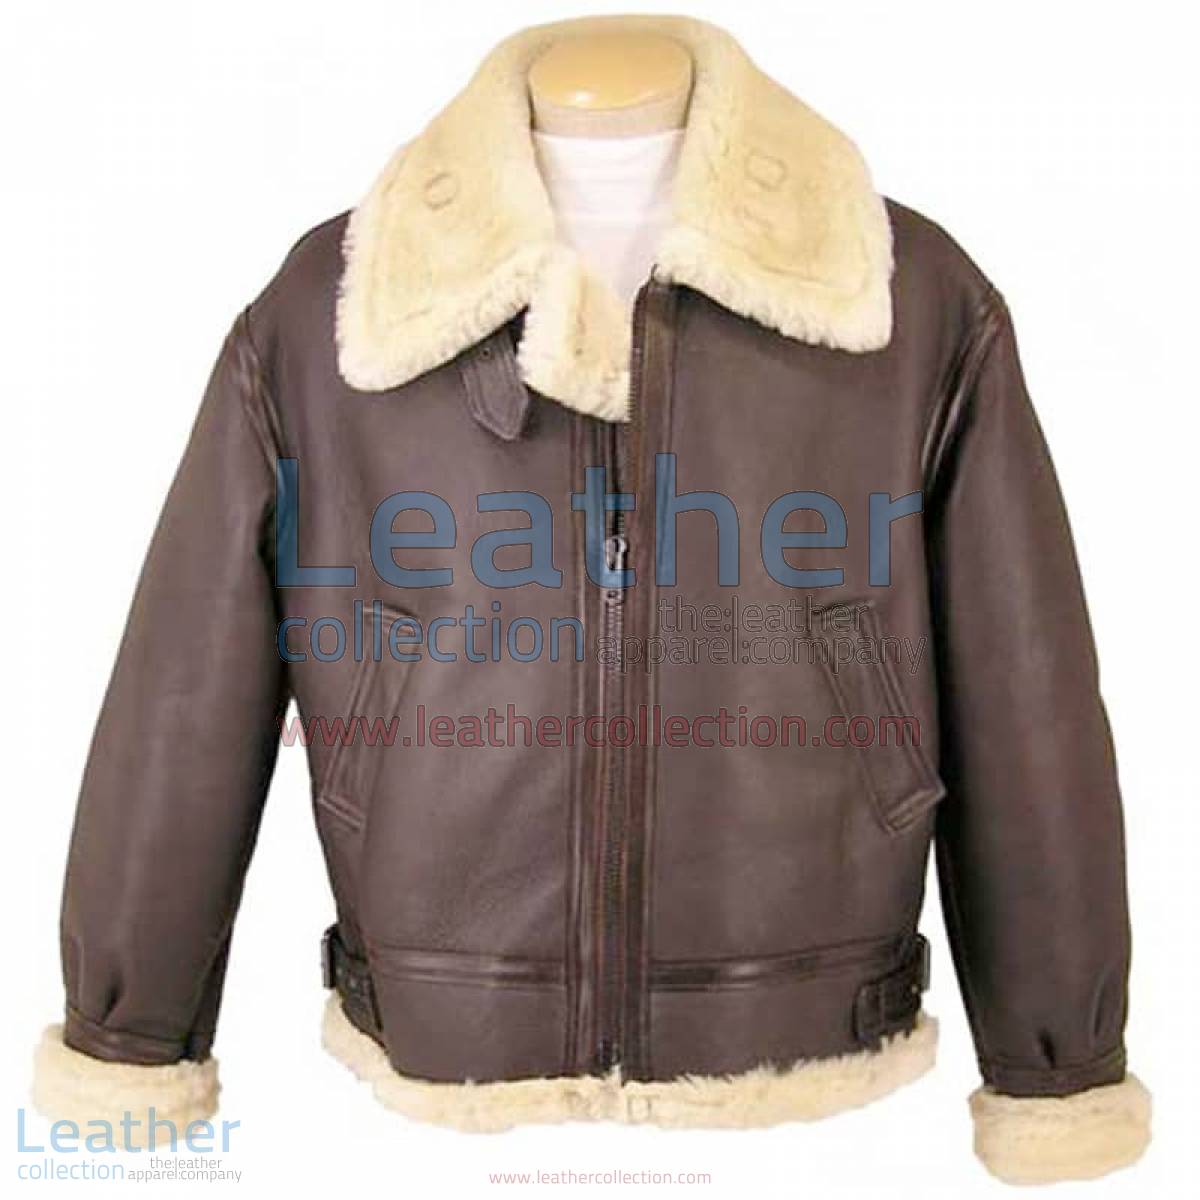 Fur Lined Leather Brown Jacket | leather brown jacket,fur lined leather jacket